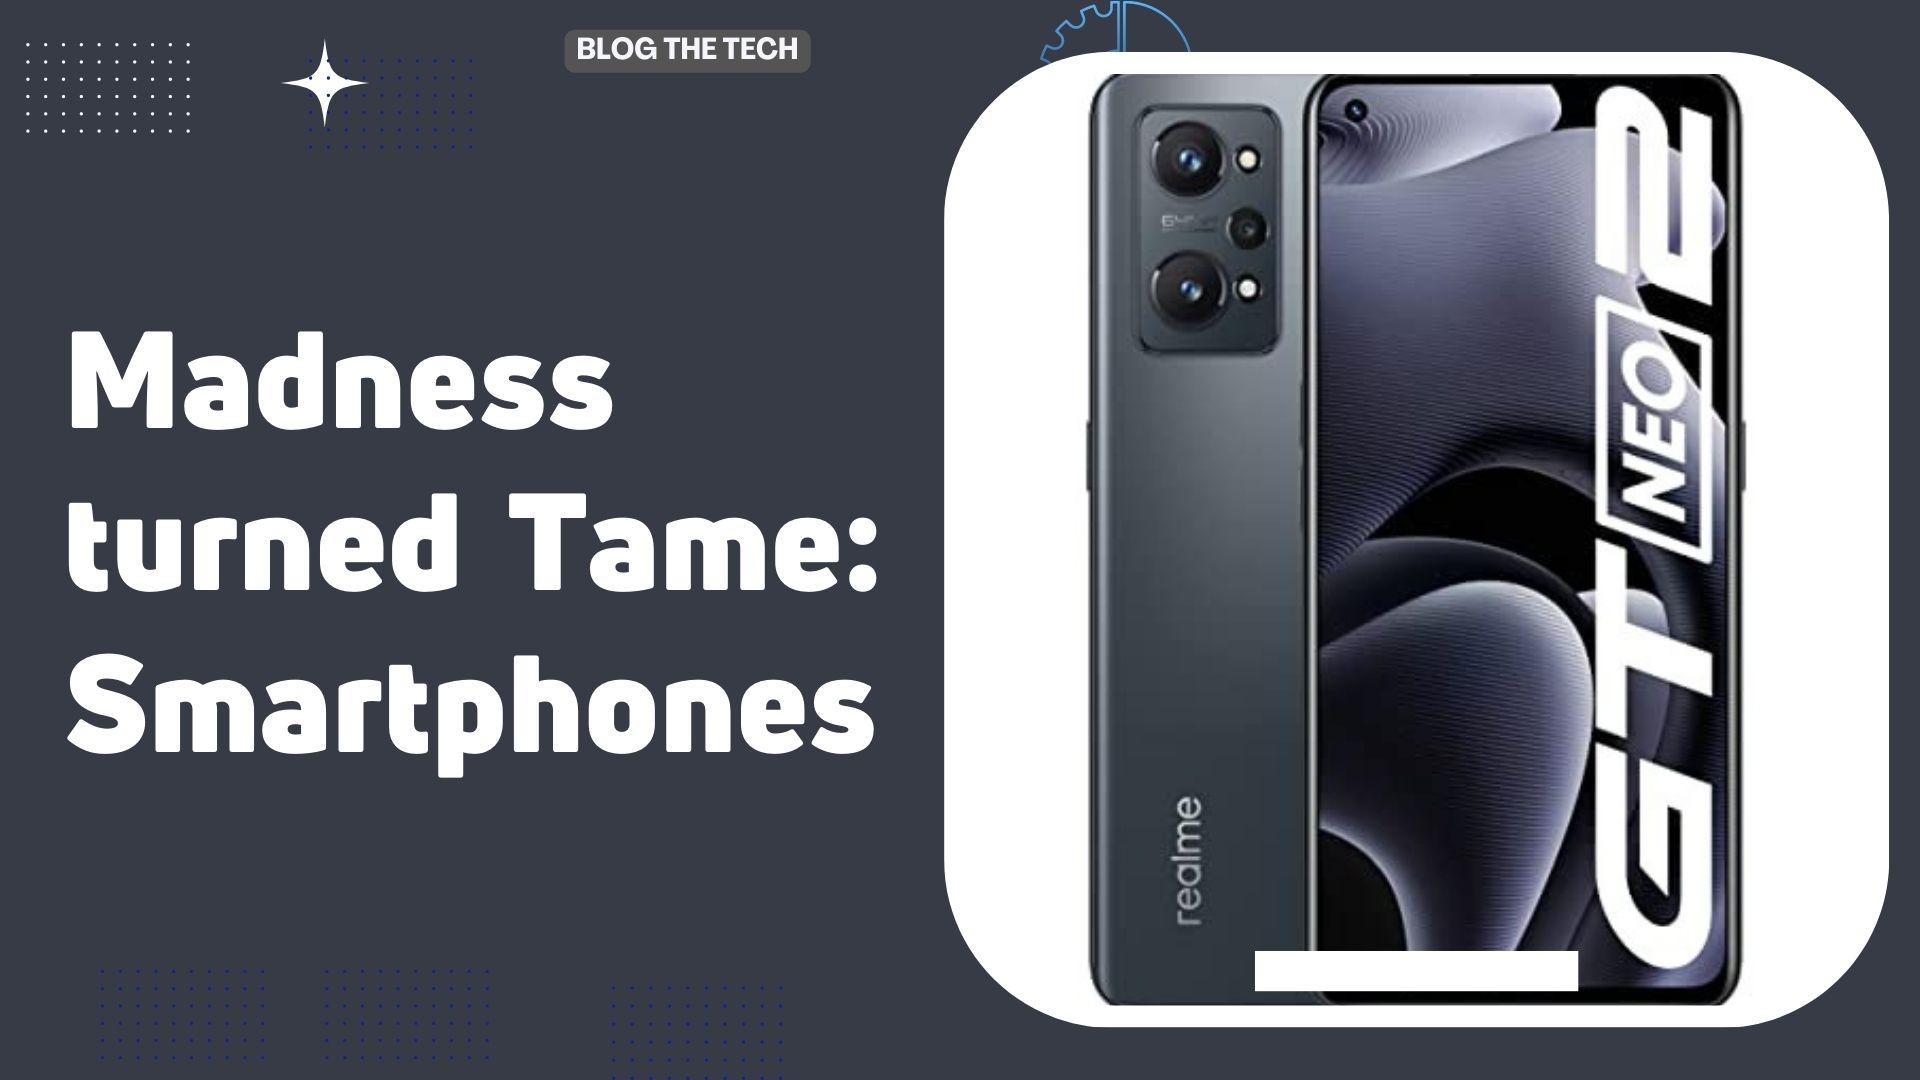 Madness turned Tame: Smartphones